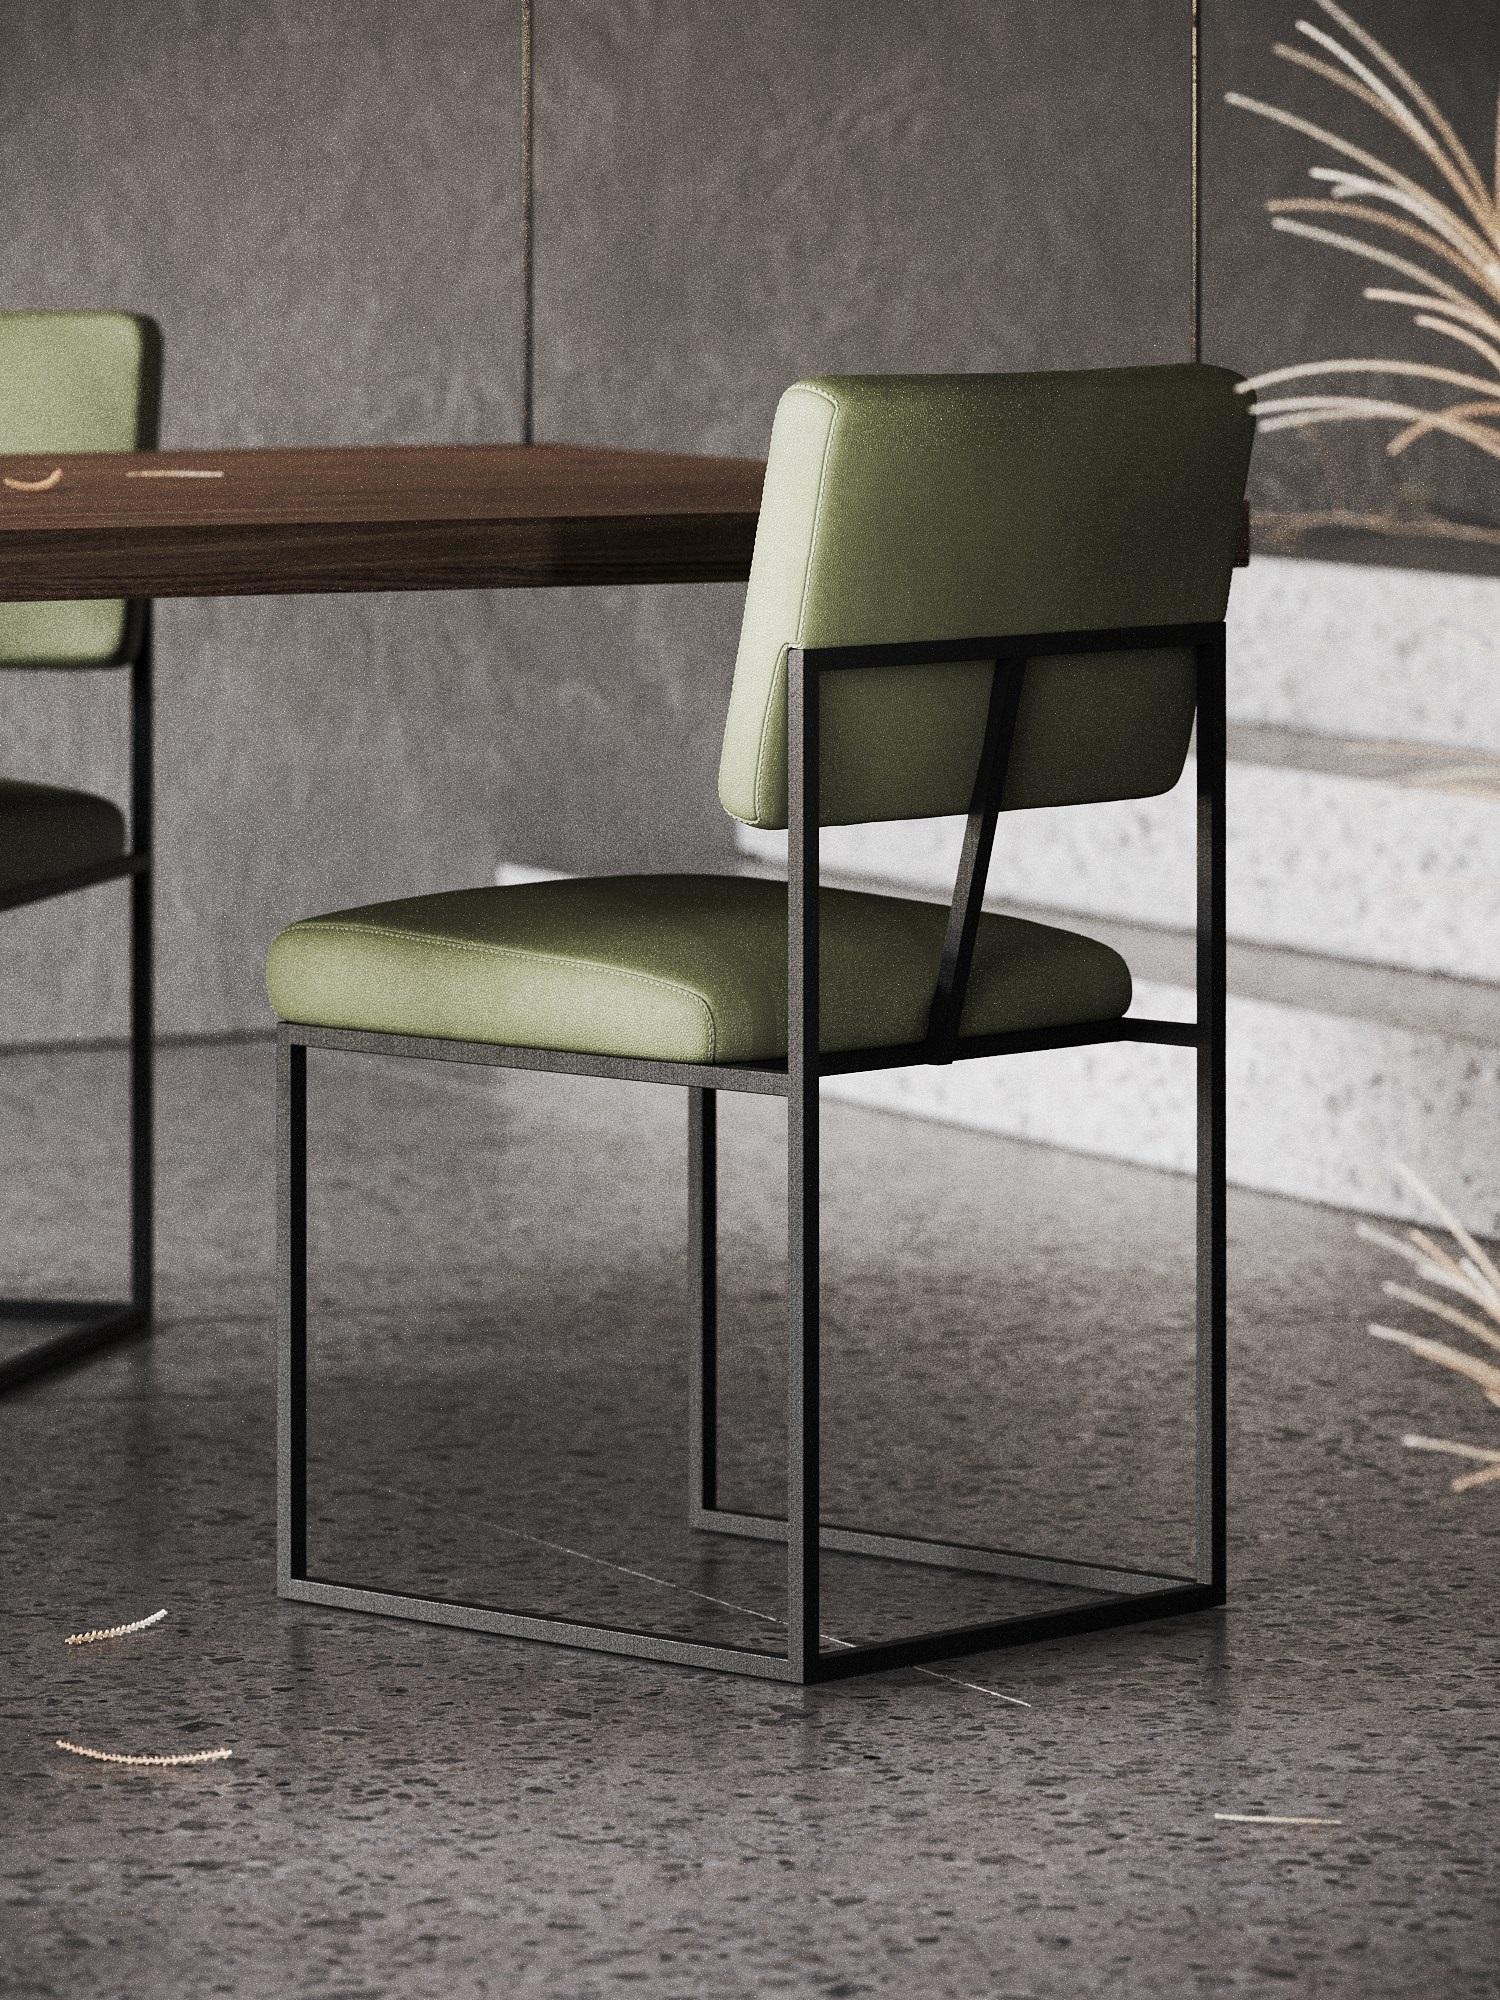 Portuguese Contemporary Dining Chairs Inspired by Minimalist Design